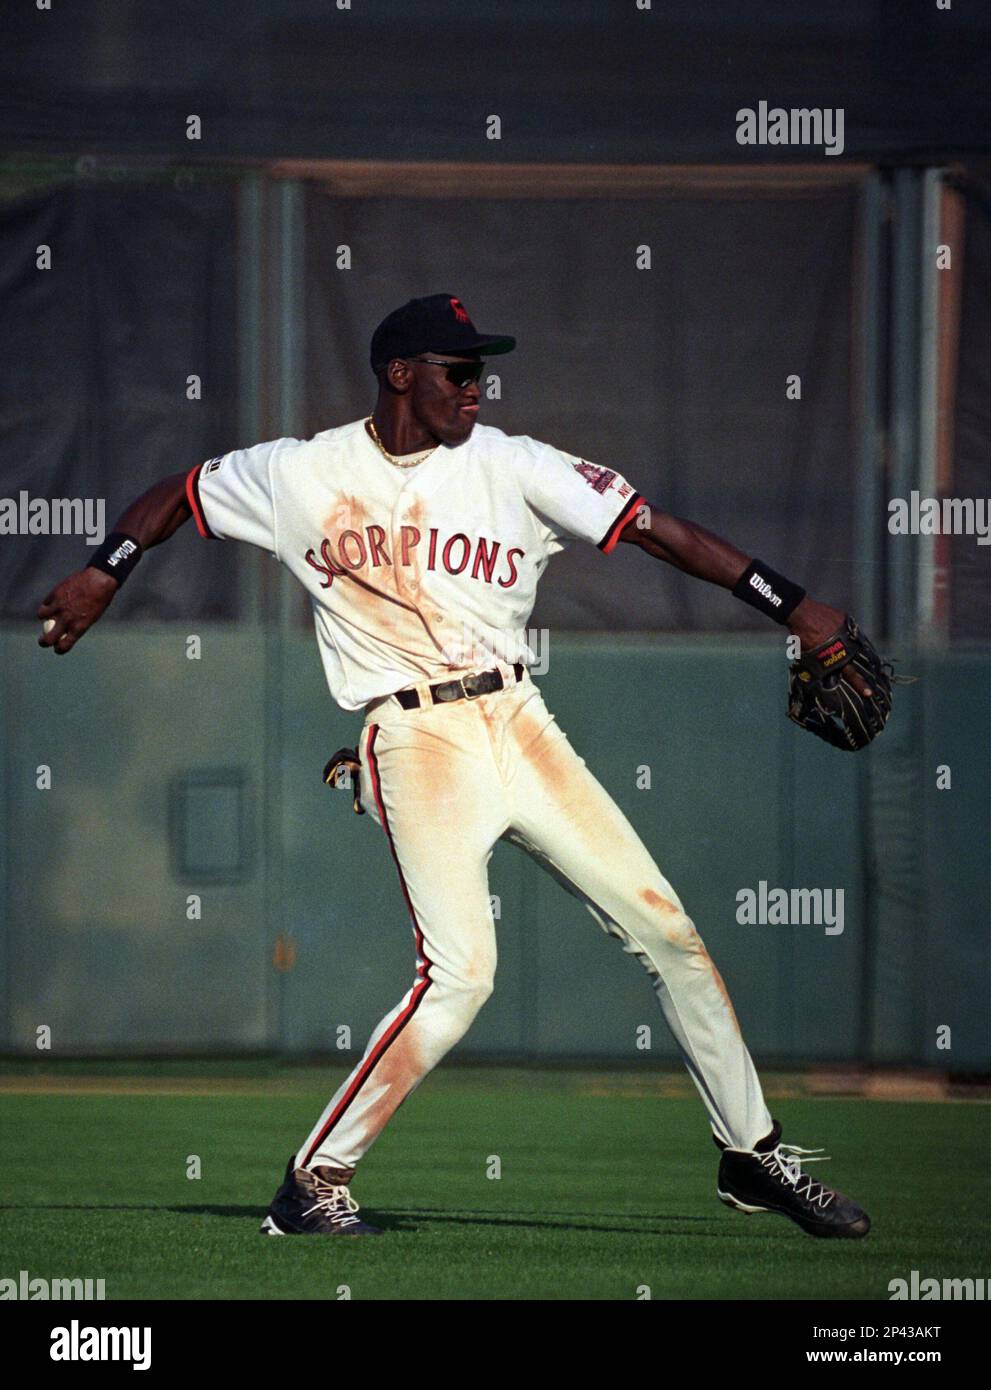 Arizona Sports History on X: 10/6/94 – Exactly one year after retiring  from the #NBA, Michael Jordan made his Arizona Fall League debut for the  Scottsdale Scorpions. MJ had an infield hit